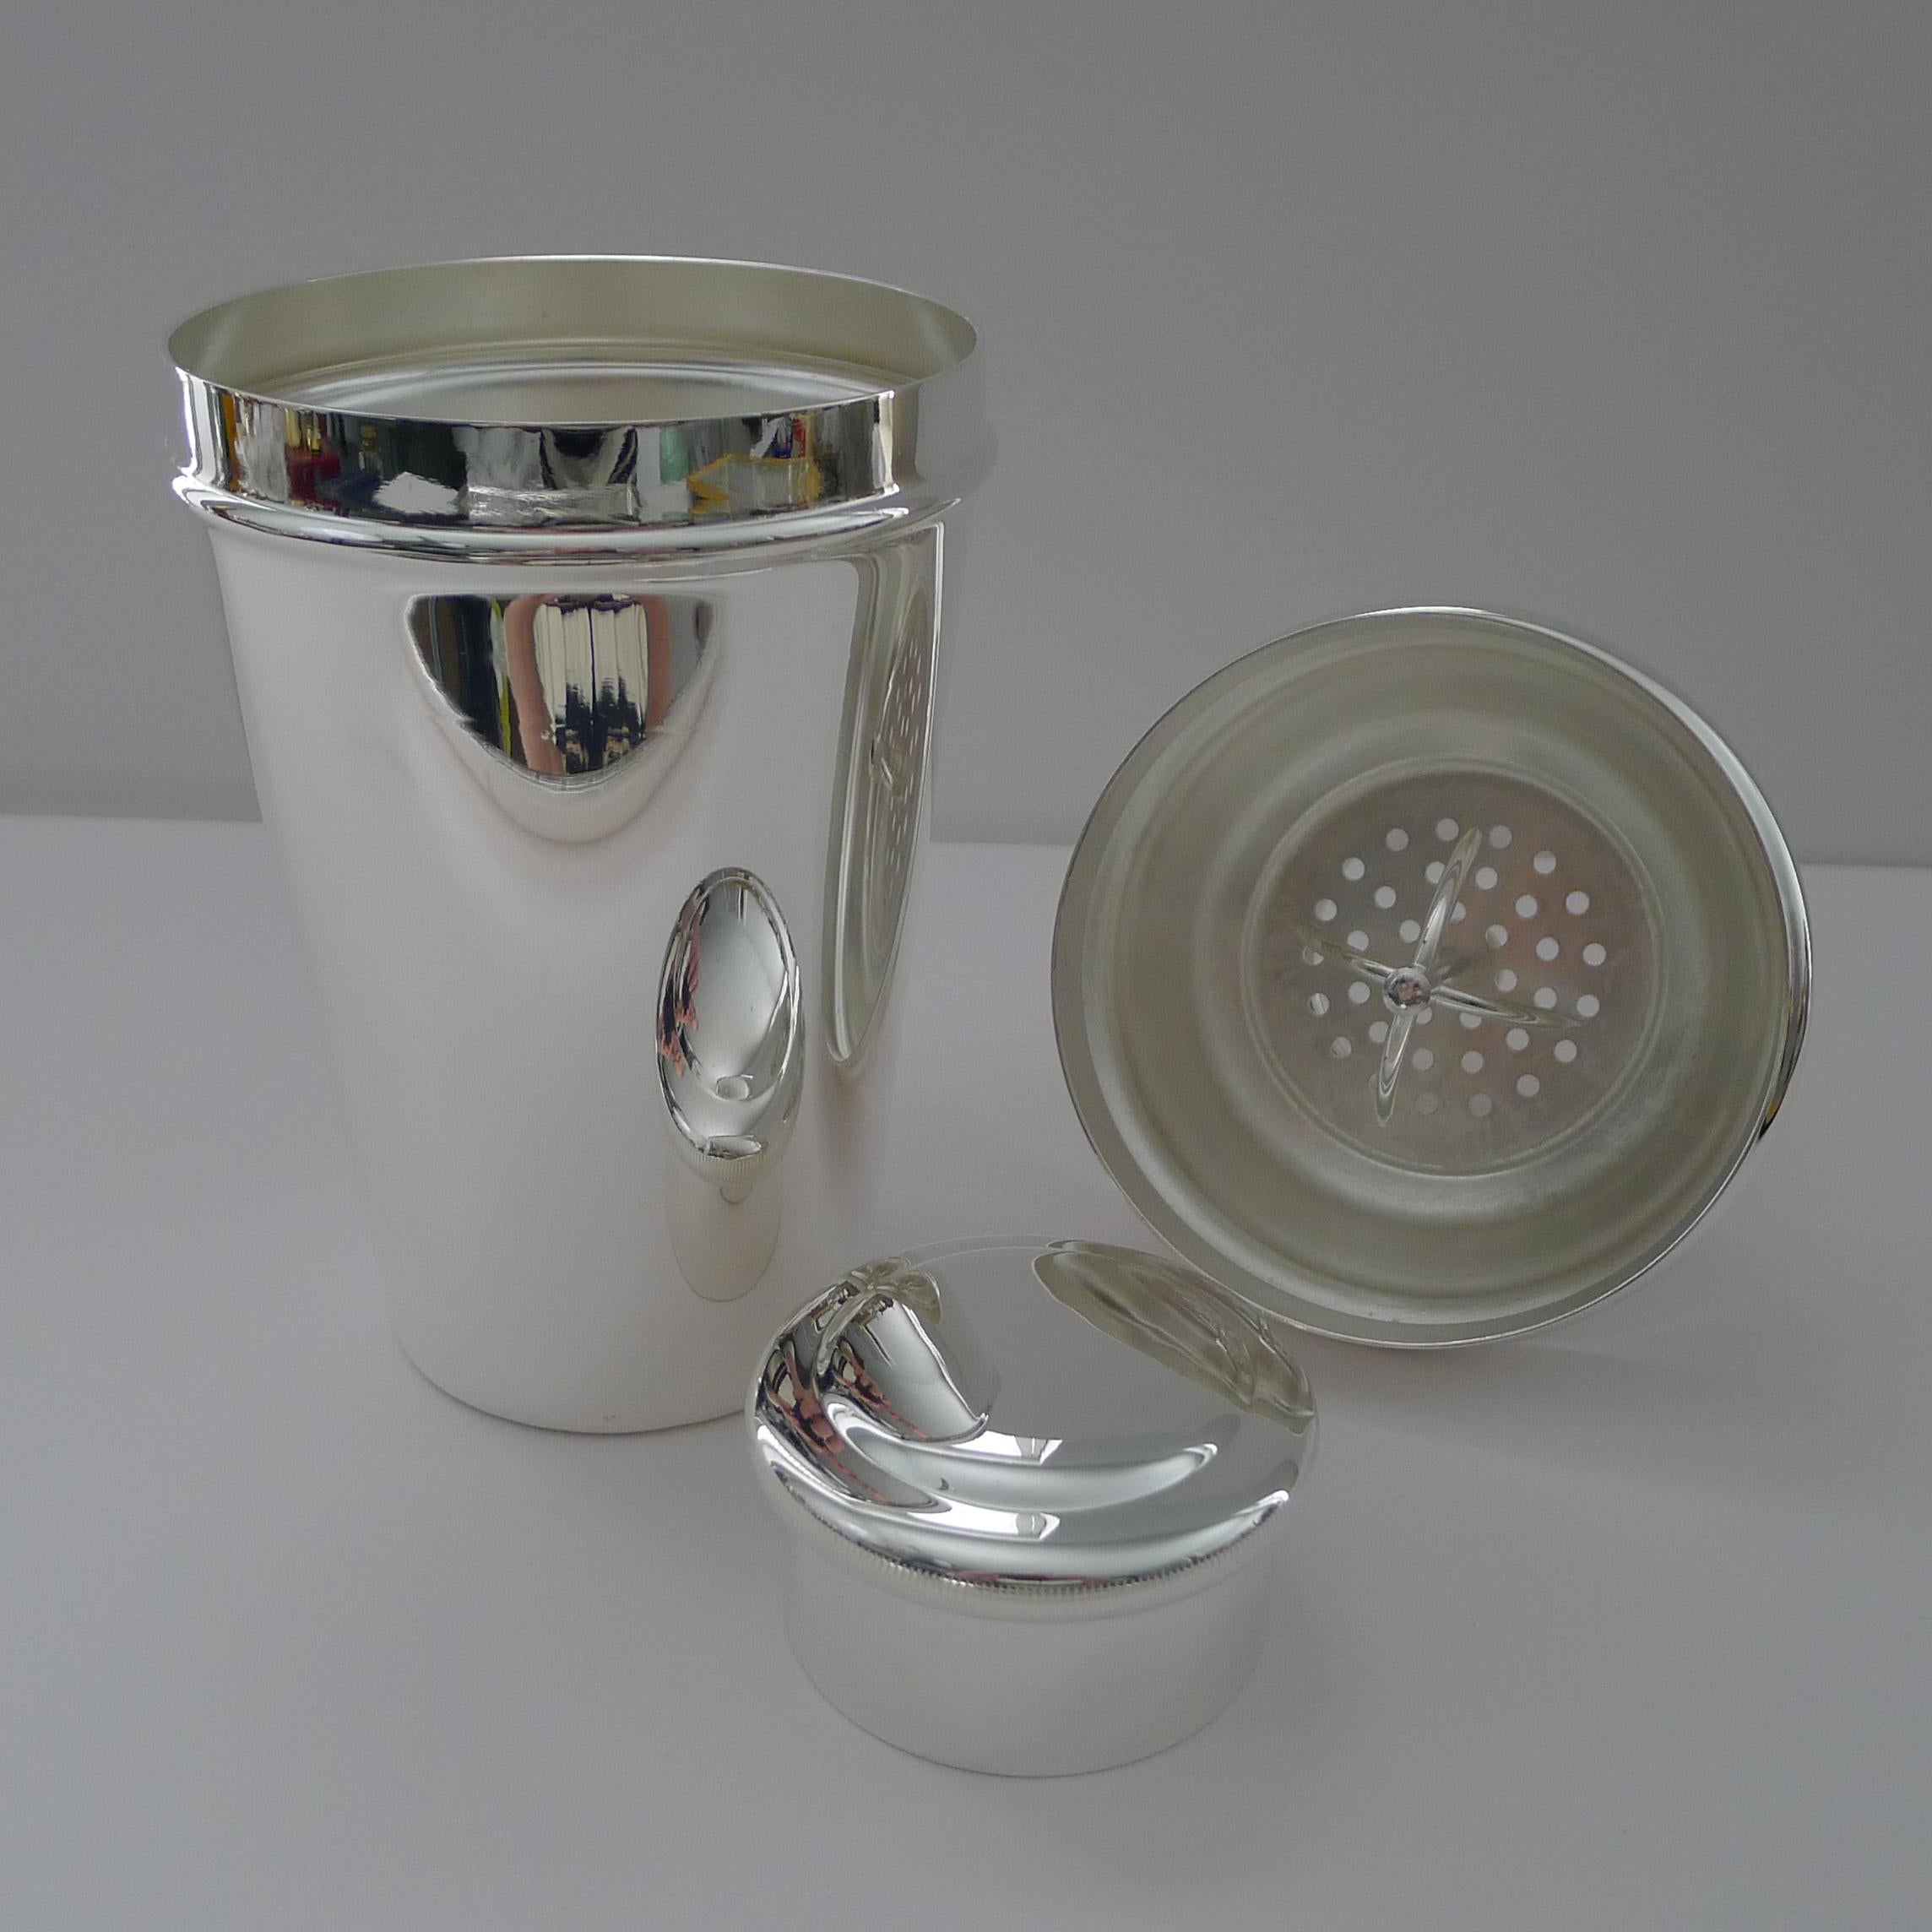 Smart Art Deco Shaker by William Suckling c.1930 - 1 1/4 Pints For Sale 2